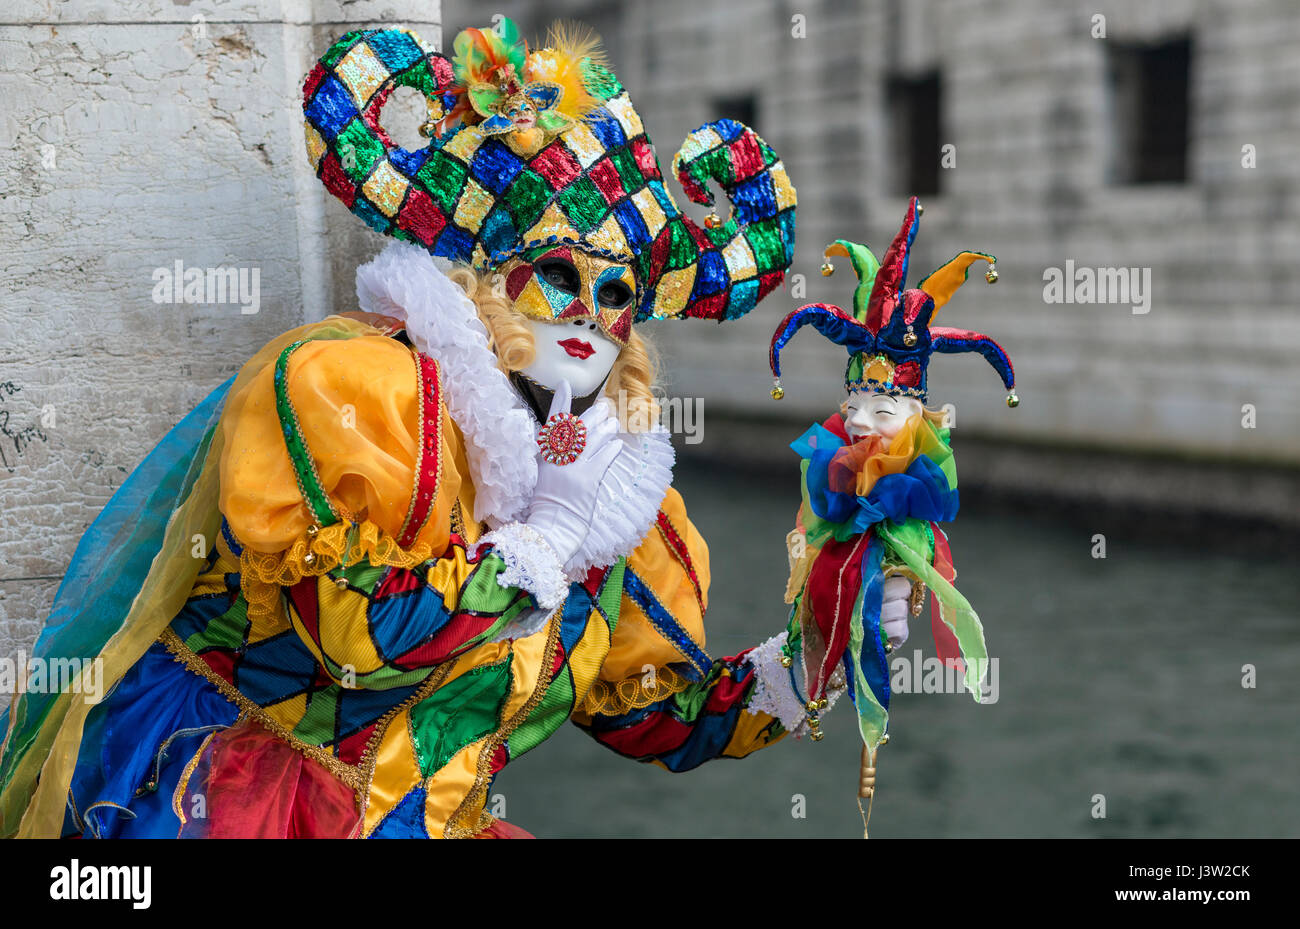 Image of an individual in a colorful costume outside of the Palace of the Doges during the Carnevale festival in Venice, Italy. Stock Photo